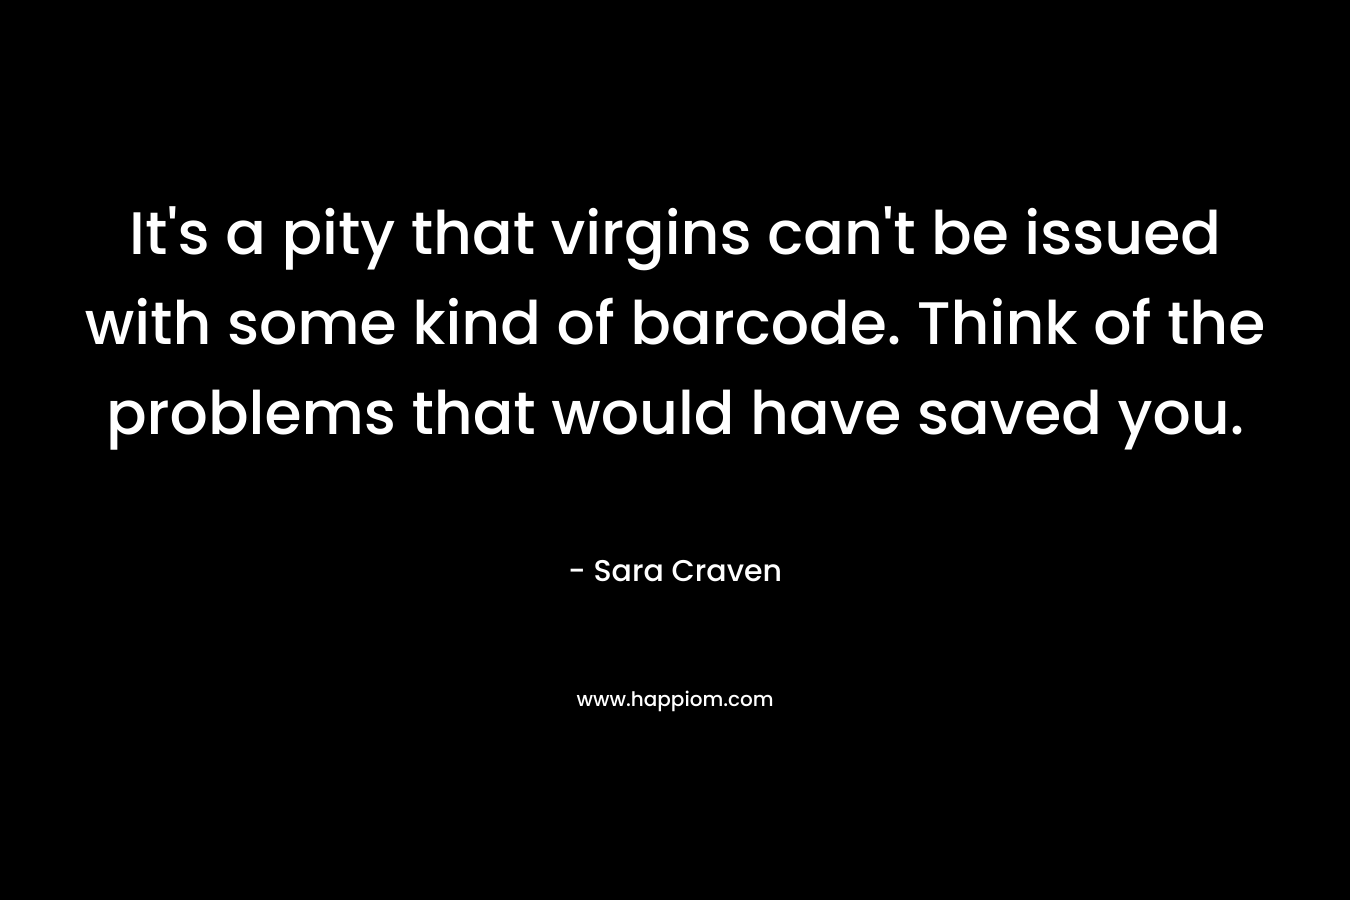 It’s a pity that virgins can’t be issued with some kind of barcode. Think of the problems that would have saved you. – Sara Craven